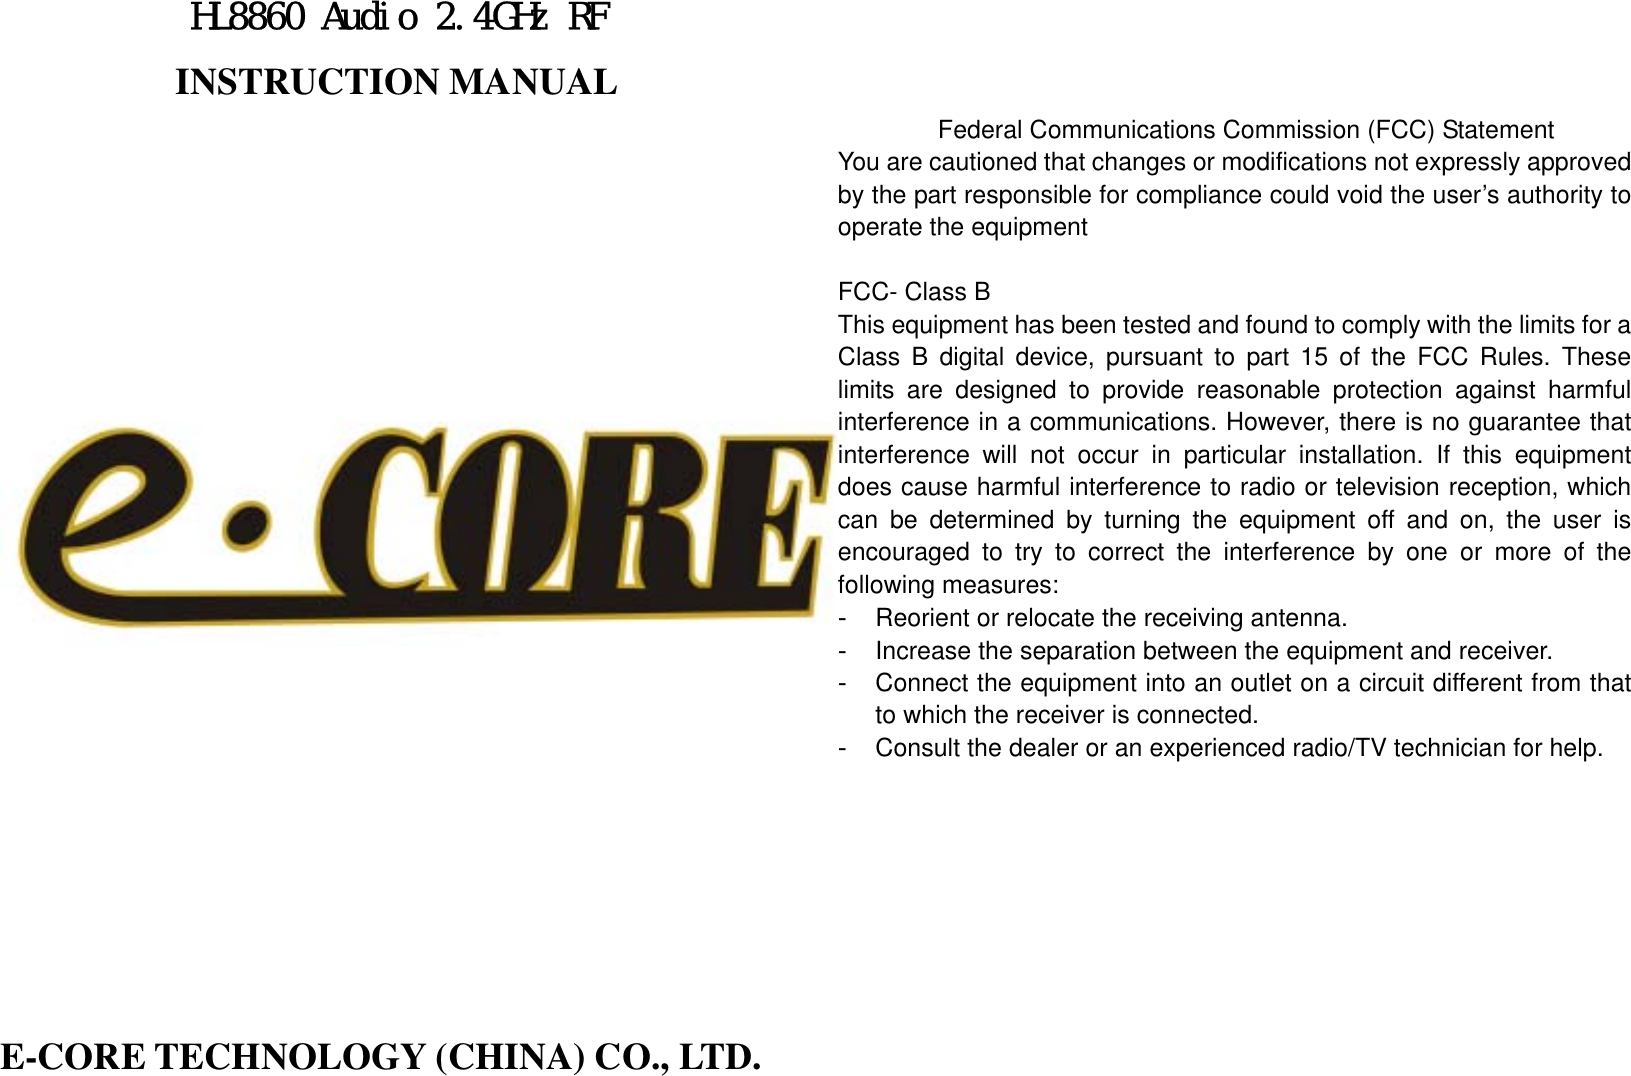 HL8860 Audio 2.4GHz RF INSTRUCTION MANUAL                               E-CORE TECHNOLOGY (CHINA) CO., LTD.    Federal Communications Commission (FCC) Statement You are cautioned that changes or modifications not expressly approved by the part responsible for compliance could void the user’s authority to operate the equipment  FCC- Class B This equipment has been tested and found to comply with the limits for a Class B digital device, pursuant to part 15 of the FCC Rules. These limits are designed to provide reasonable protection against harmful interference in a communications. However, there is no guarantee that interference will not occur in particular installation. If this equipment does cause harmful interference to radio or television reception, which can be determined by turning the equipment off and on, the user is encouraged to try to correct the interference by one or more of the following measures: -  Reorient or relocate the receiving antenna. -  Increase the separation between the equipment and receiver. -  Connect the equipment into an outlet on a circuit different from that to which the receiver is connected. -  Consult the dealer or an experienced radio/TV technician for help.            